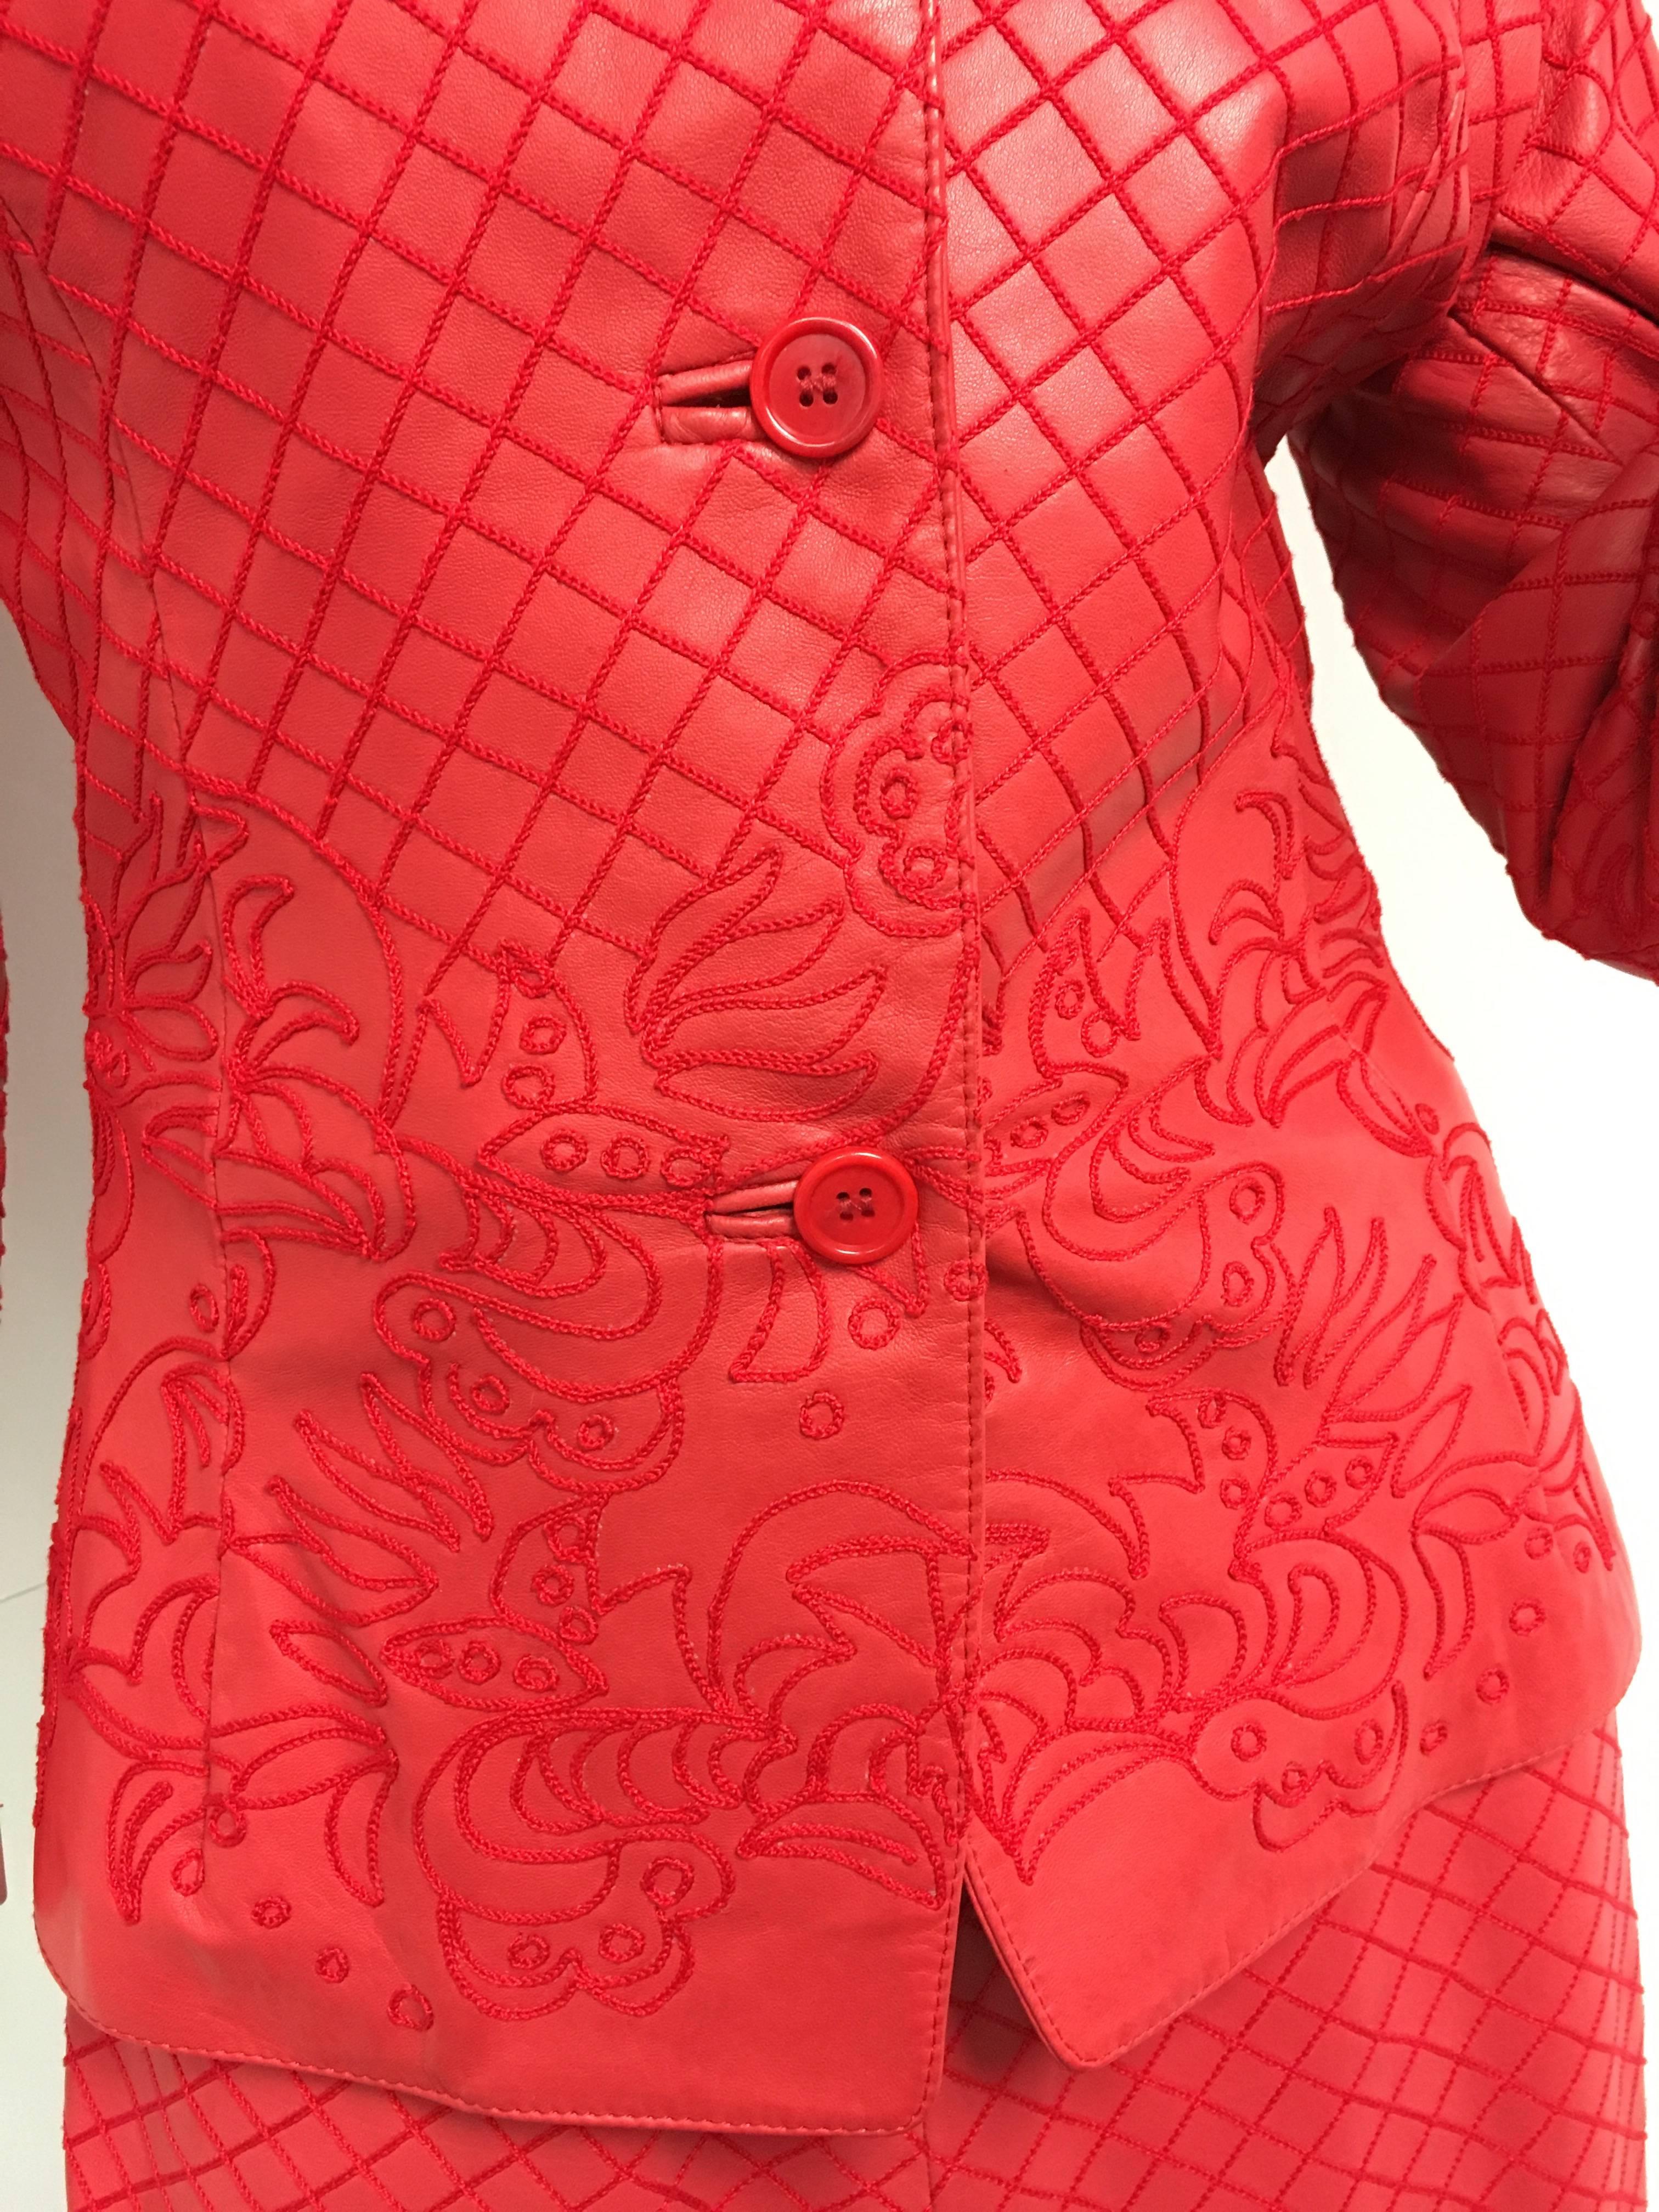 Rare Gianne Versace red leather suit with embroidered design throughout.
Size: Extra Small
Condition: Excellent